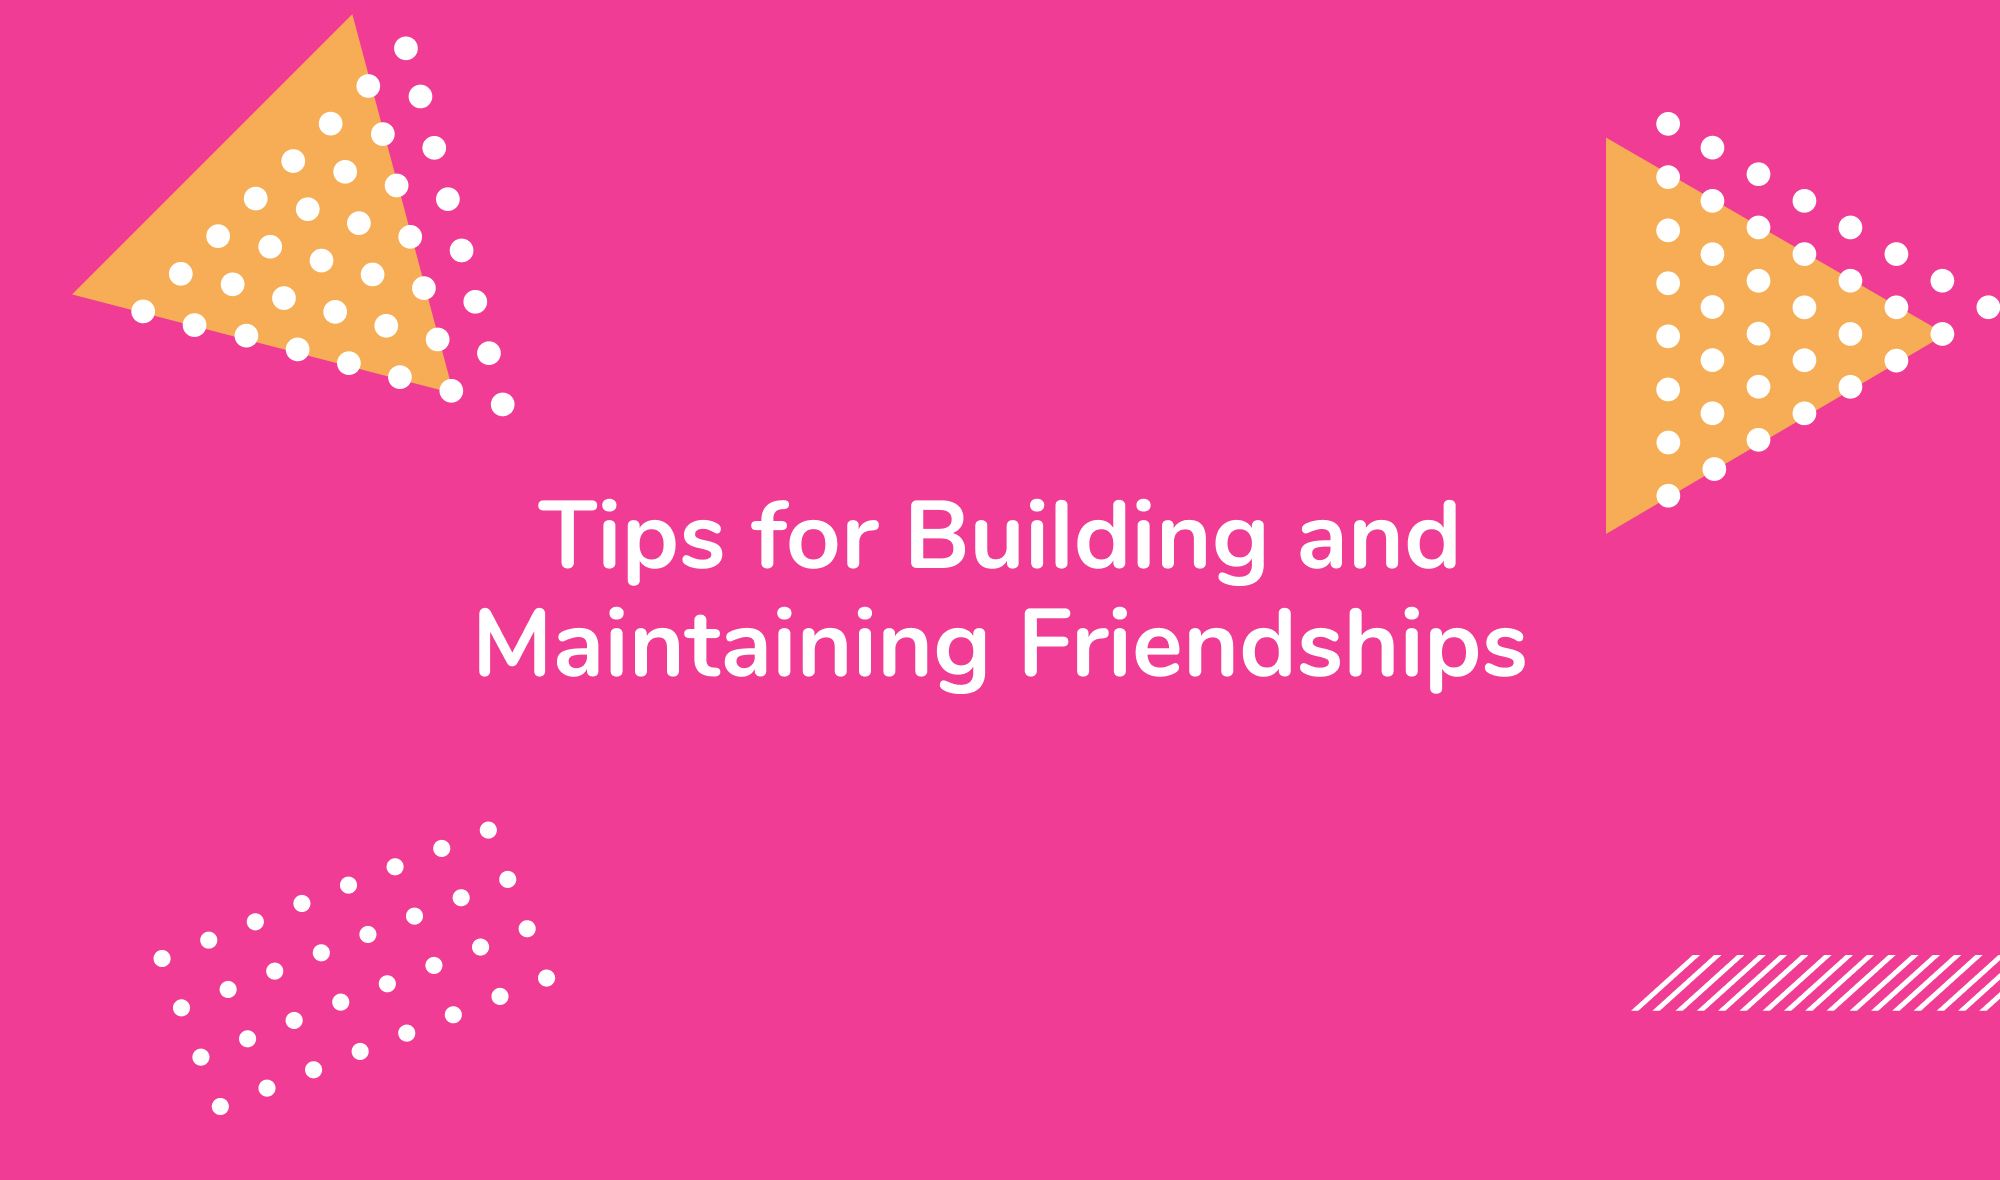 Tips for Building and Maintaining Friendships